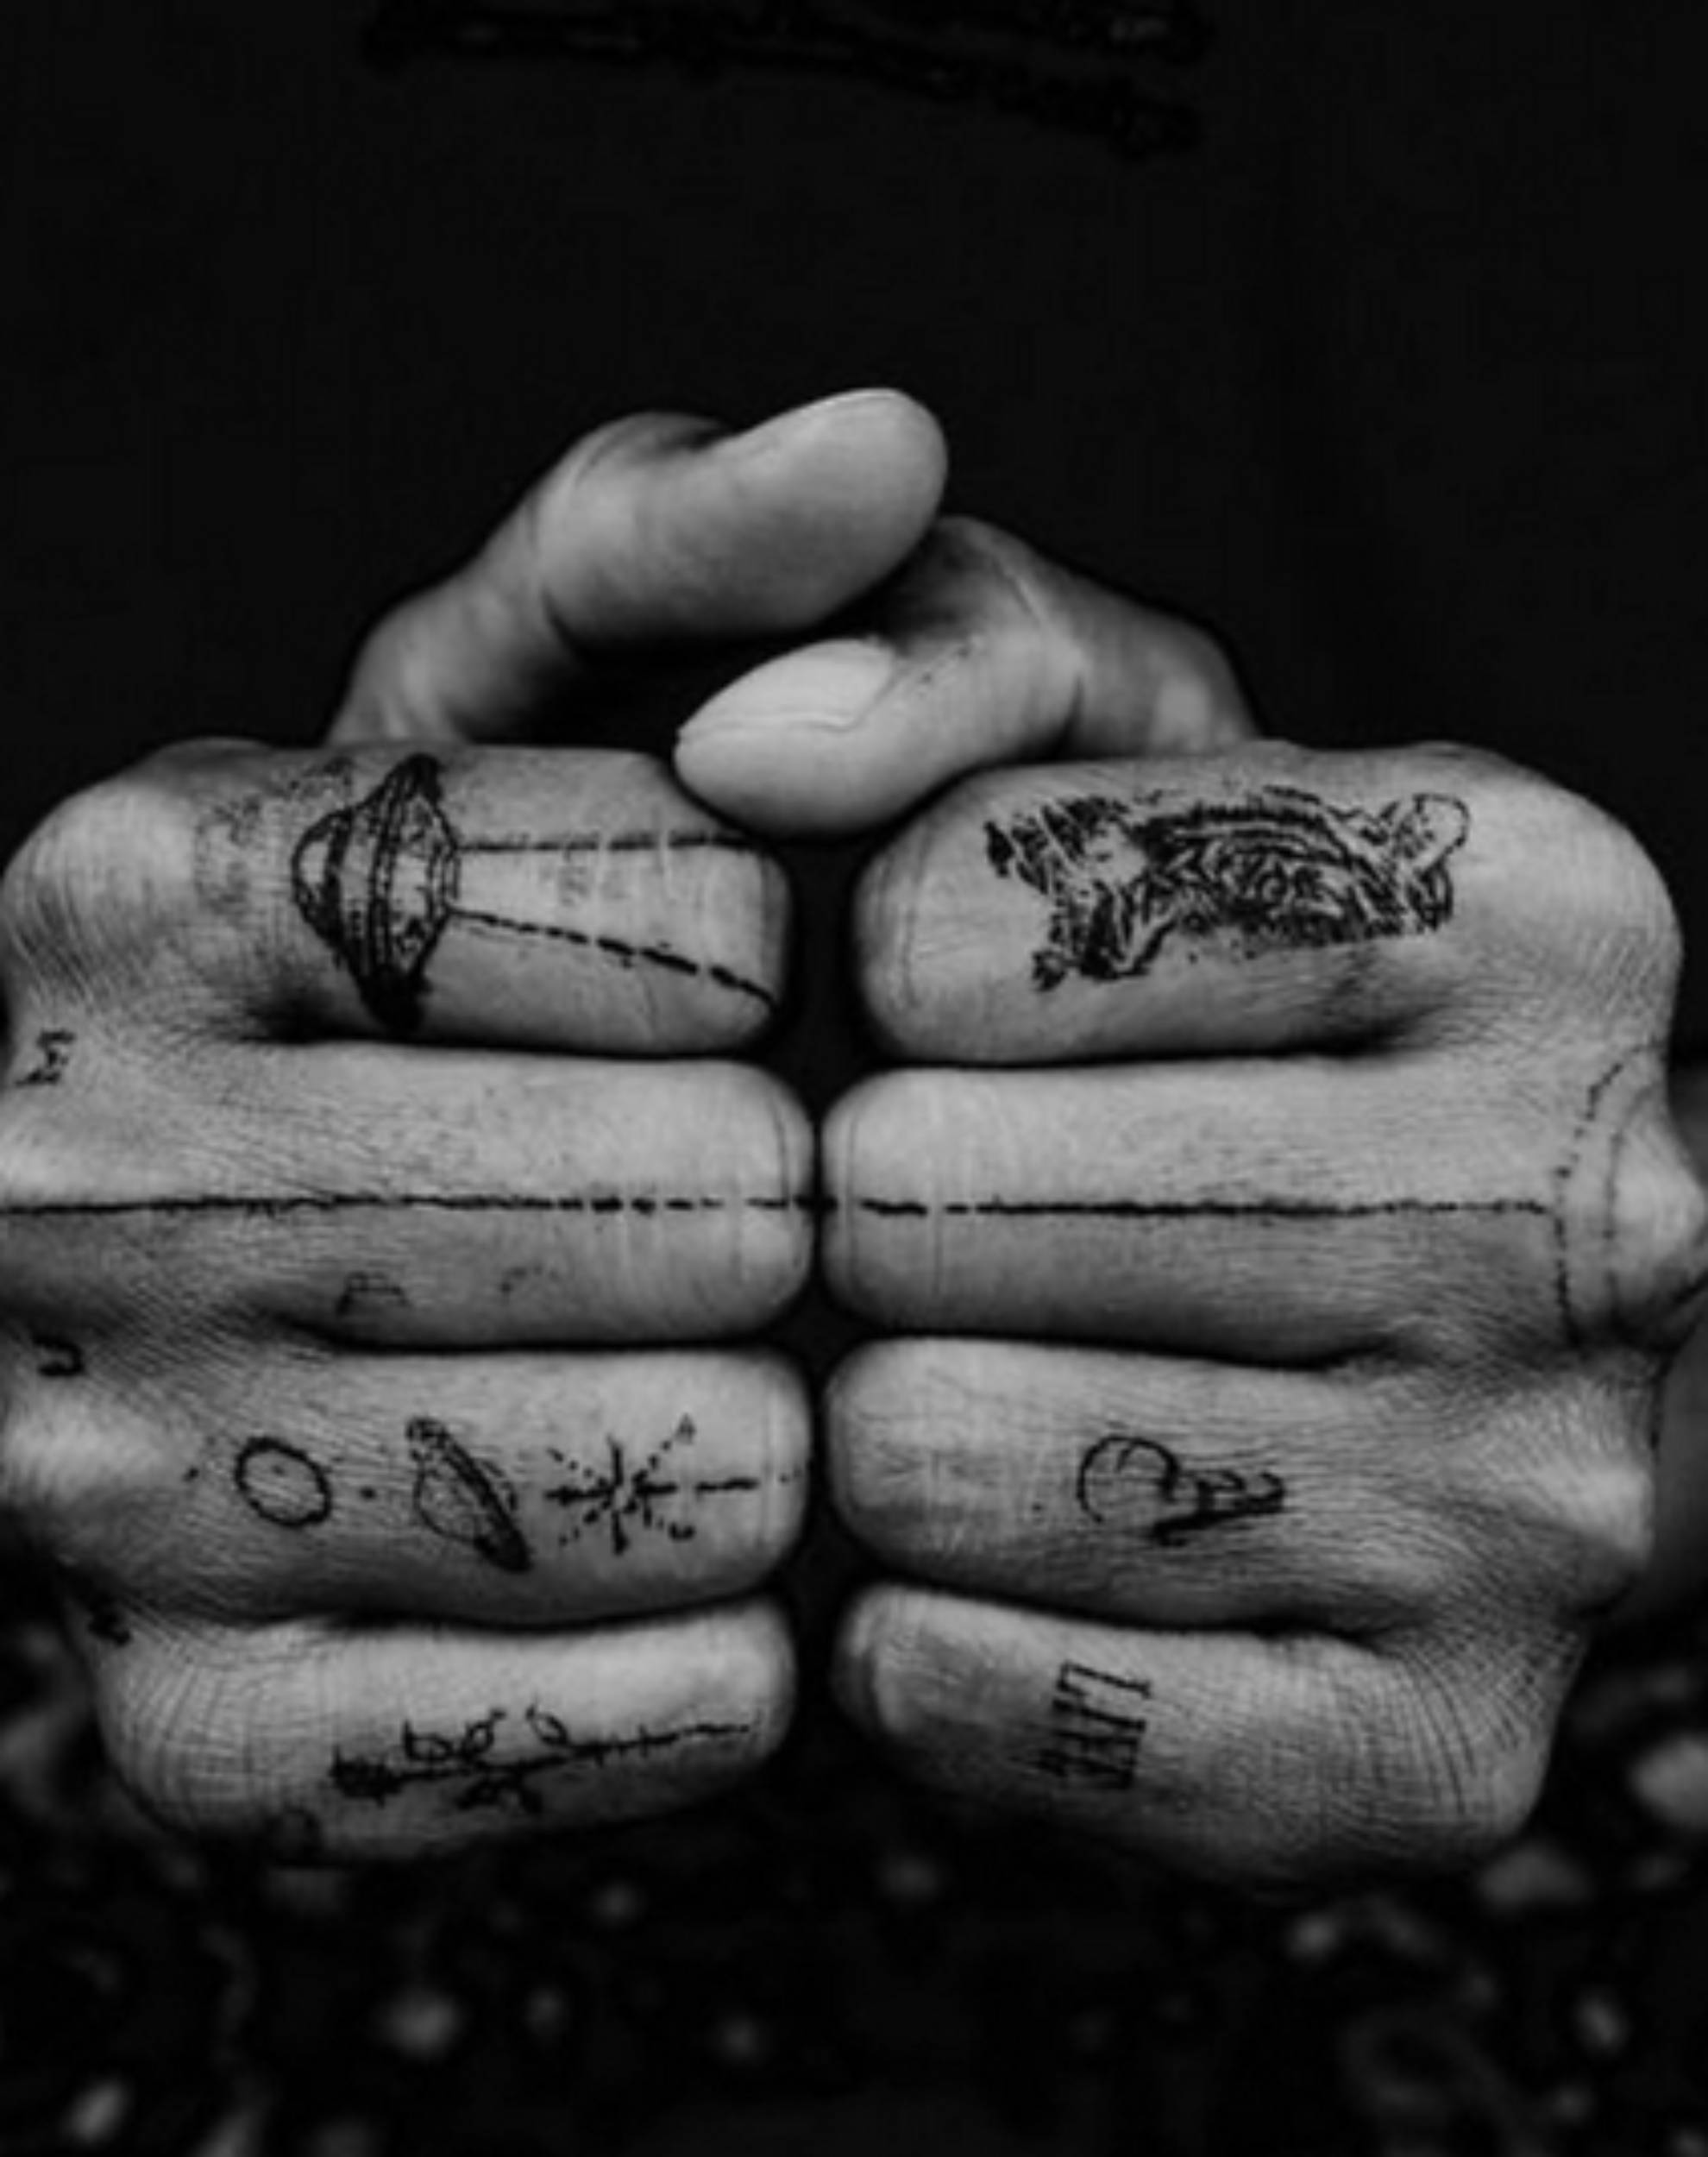 Lewis Hamilton posts and then deletes photo of his mysterious new tattoos |  Marca